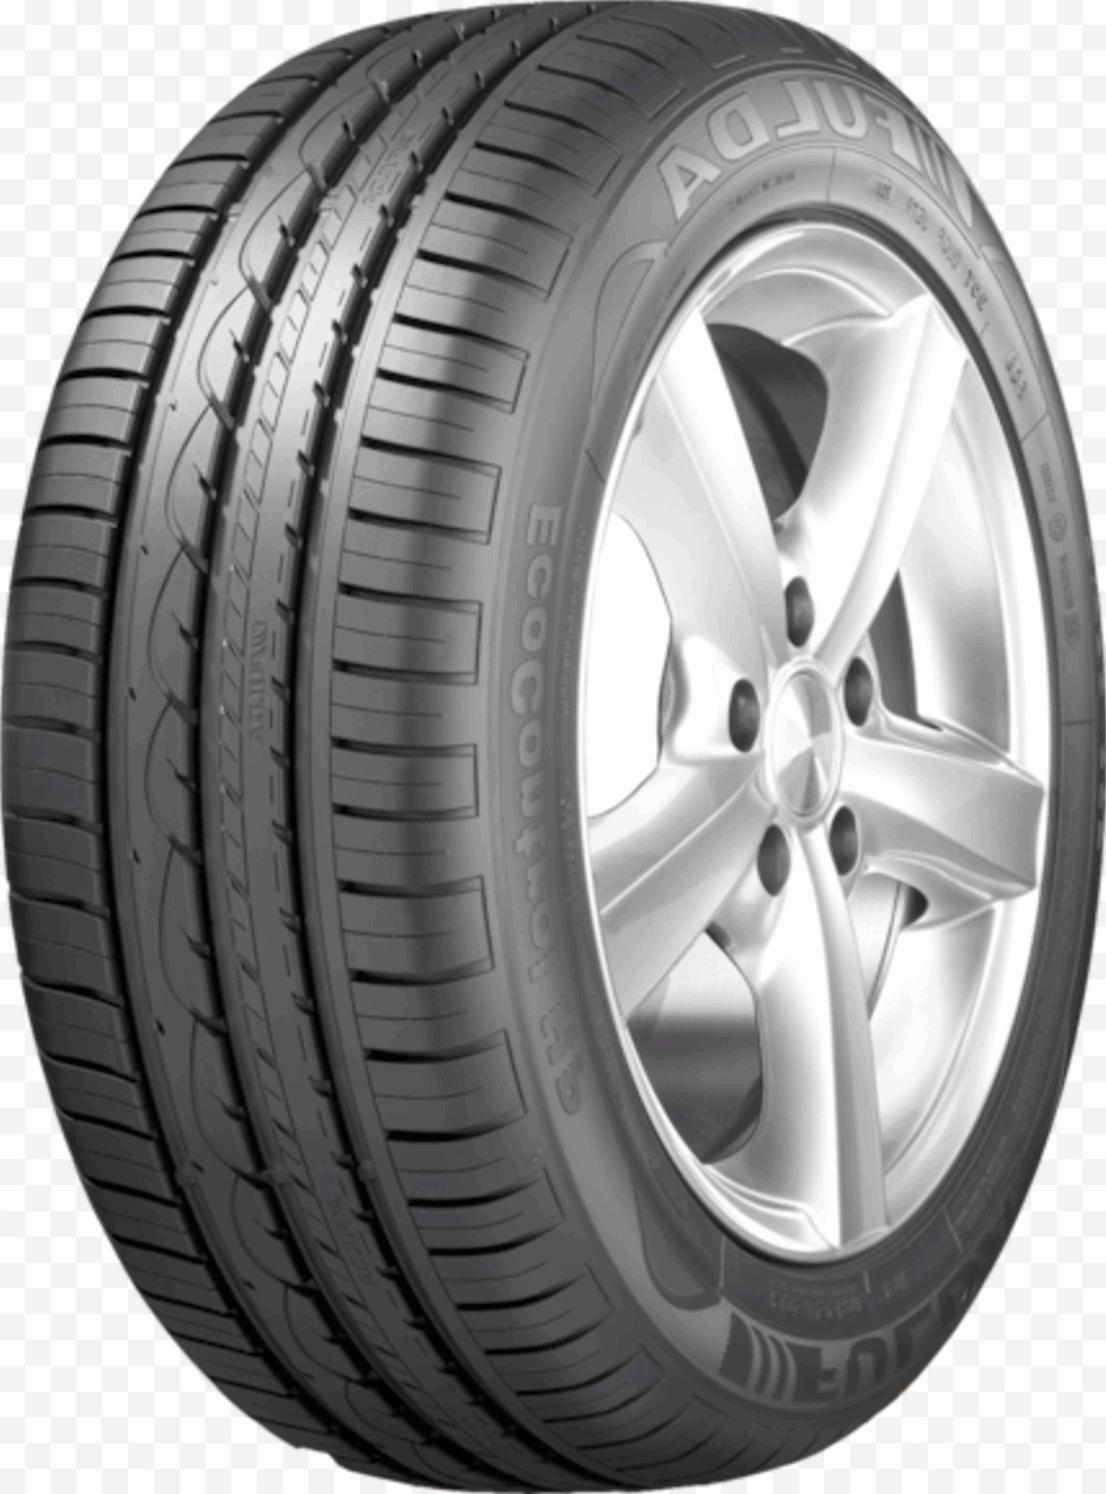 Fulda EcoControl HP - Tyre Reviews and Tests